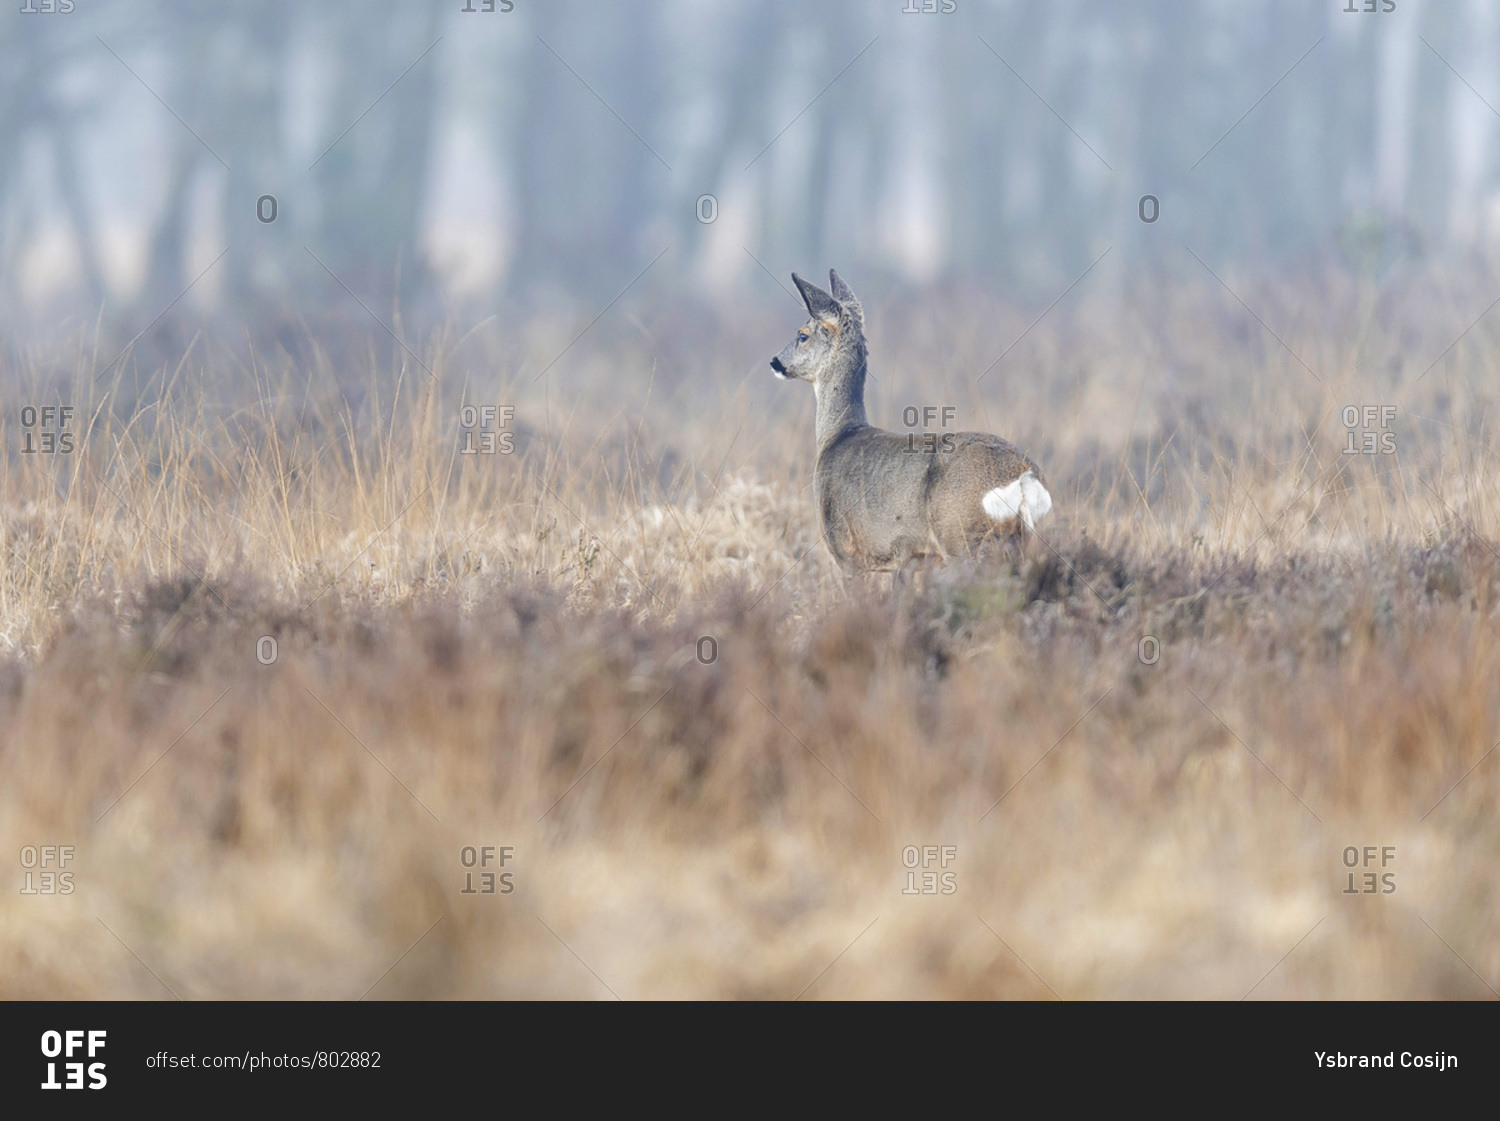 Telephoto view of a young deer in a cool toned field